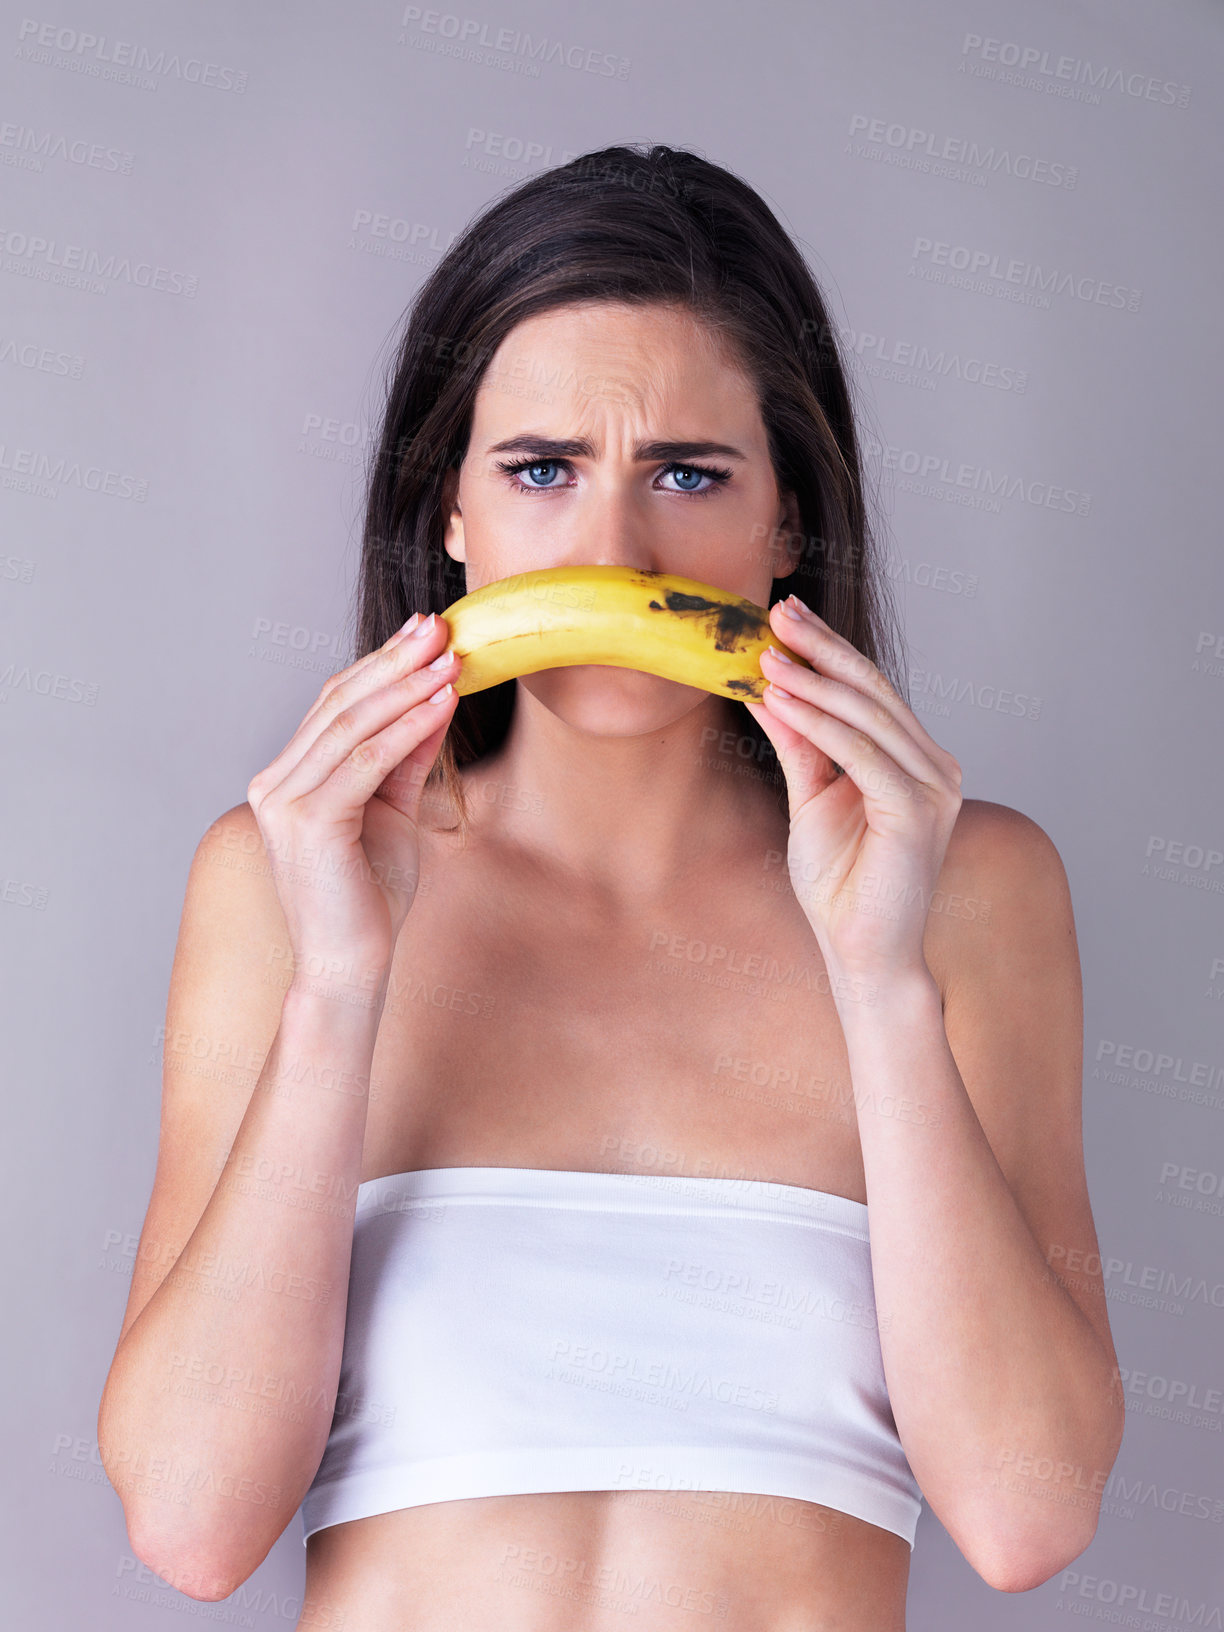 Buy stock photo Studio portrait of an attractive young woman holding a banana against a purple background